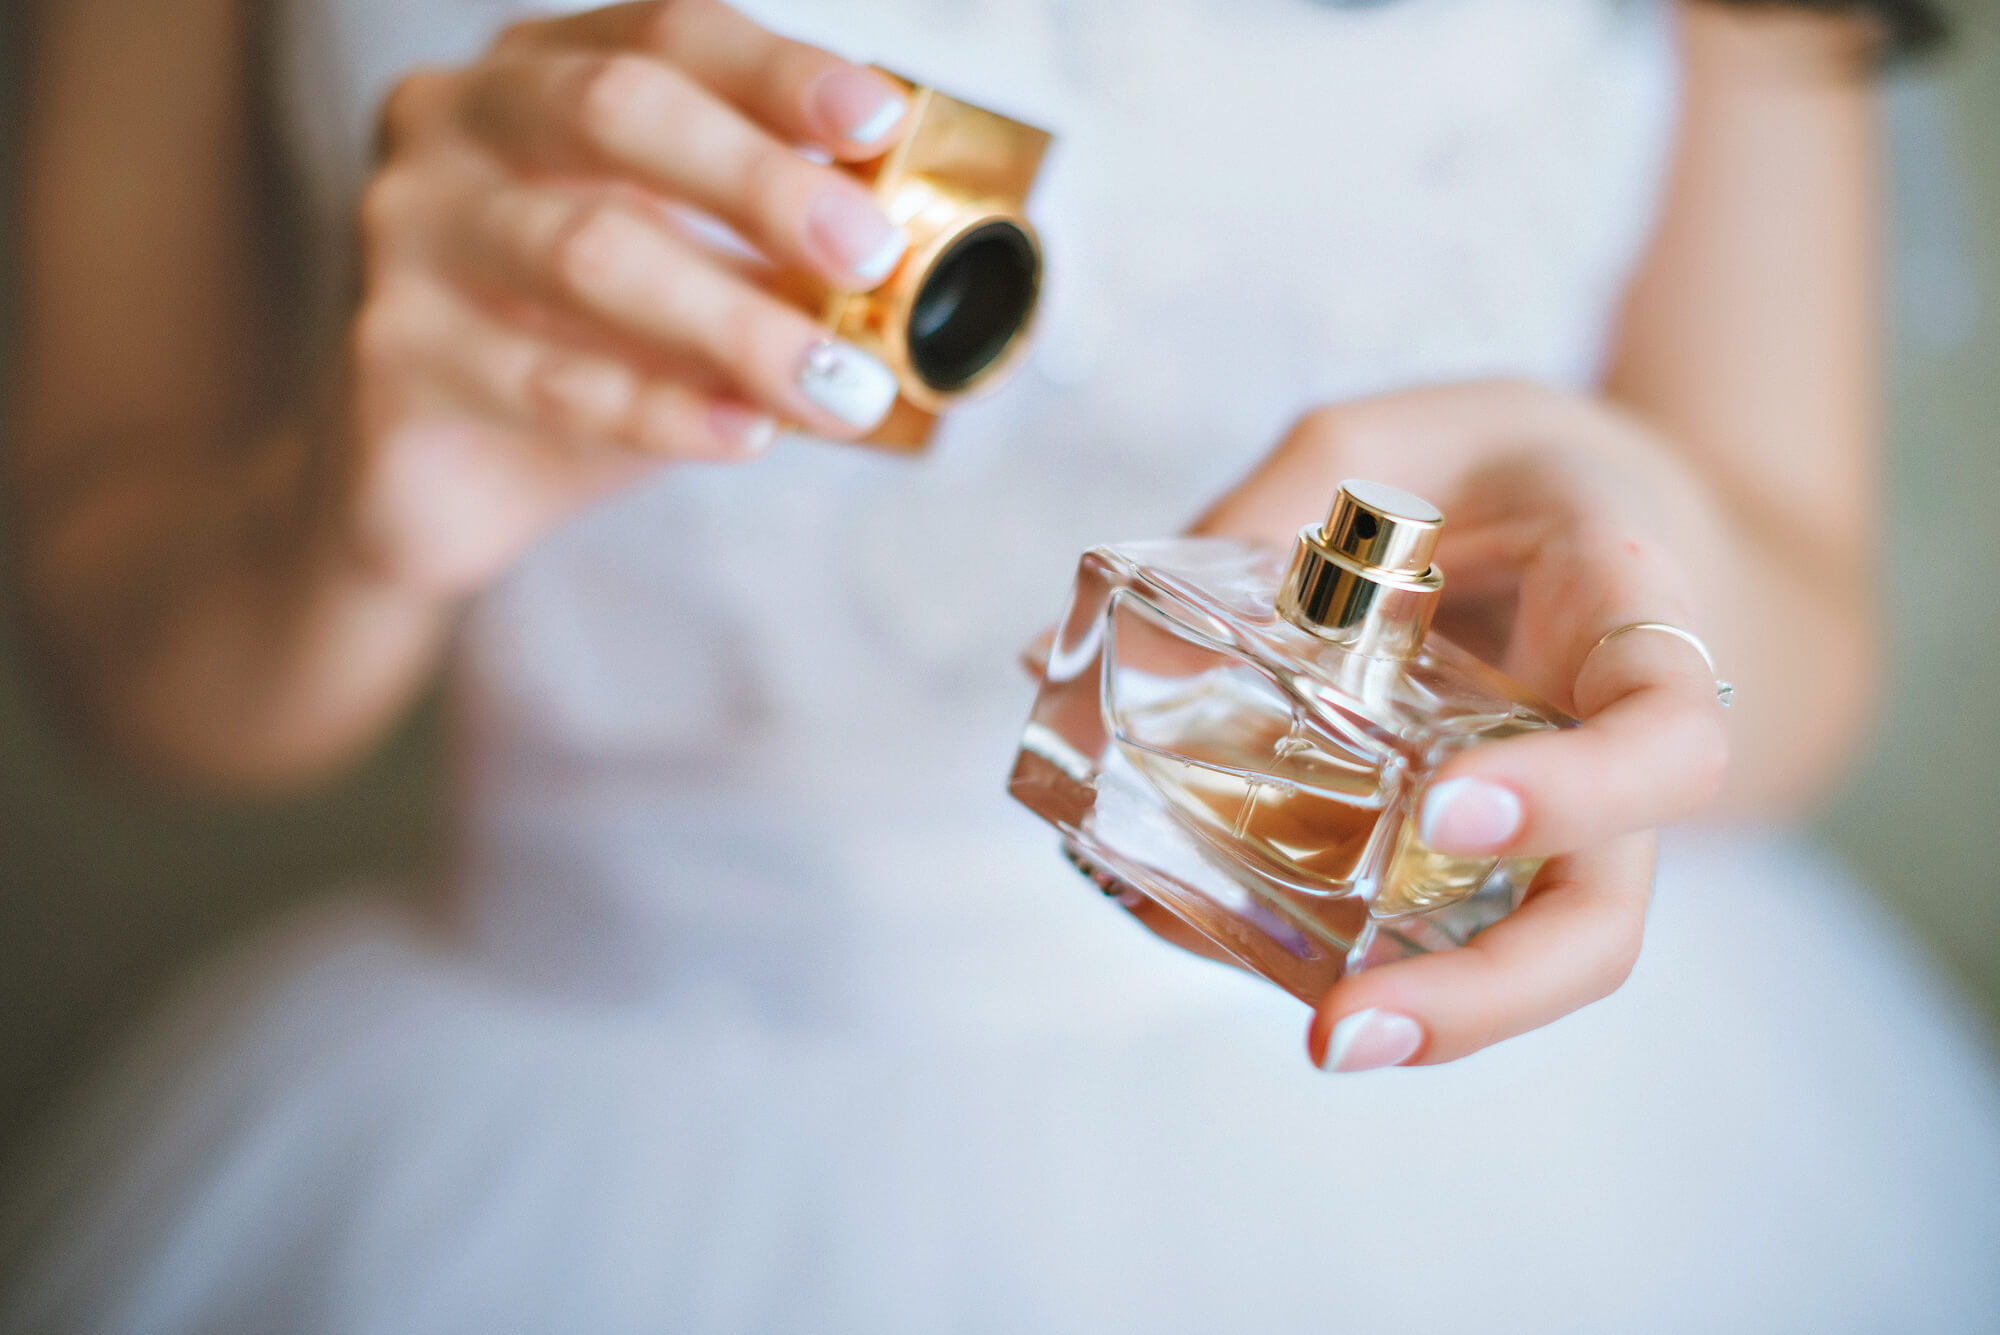 International Fragrance Day (March 21st) | Days Of The Year